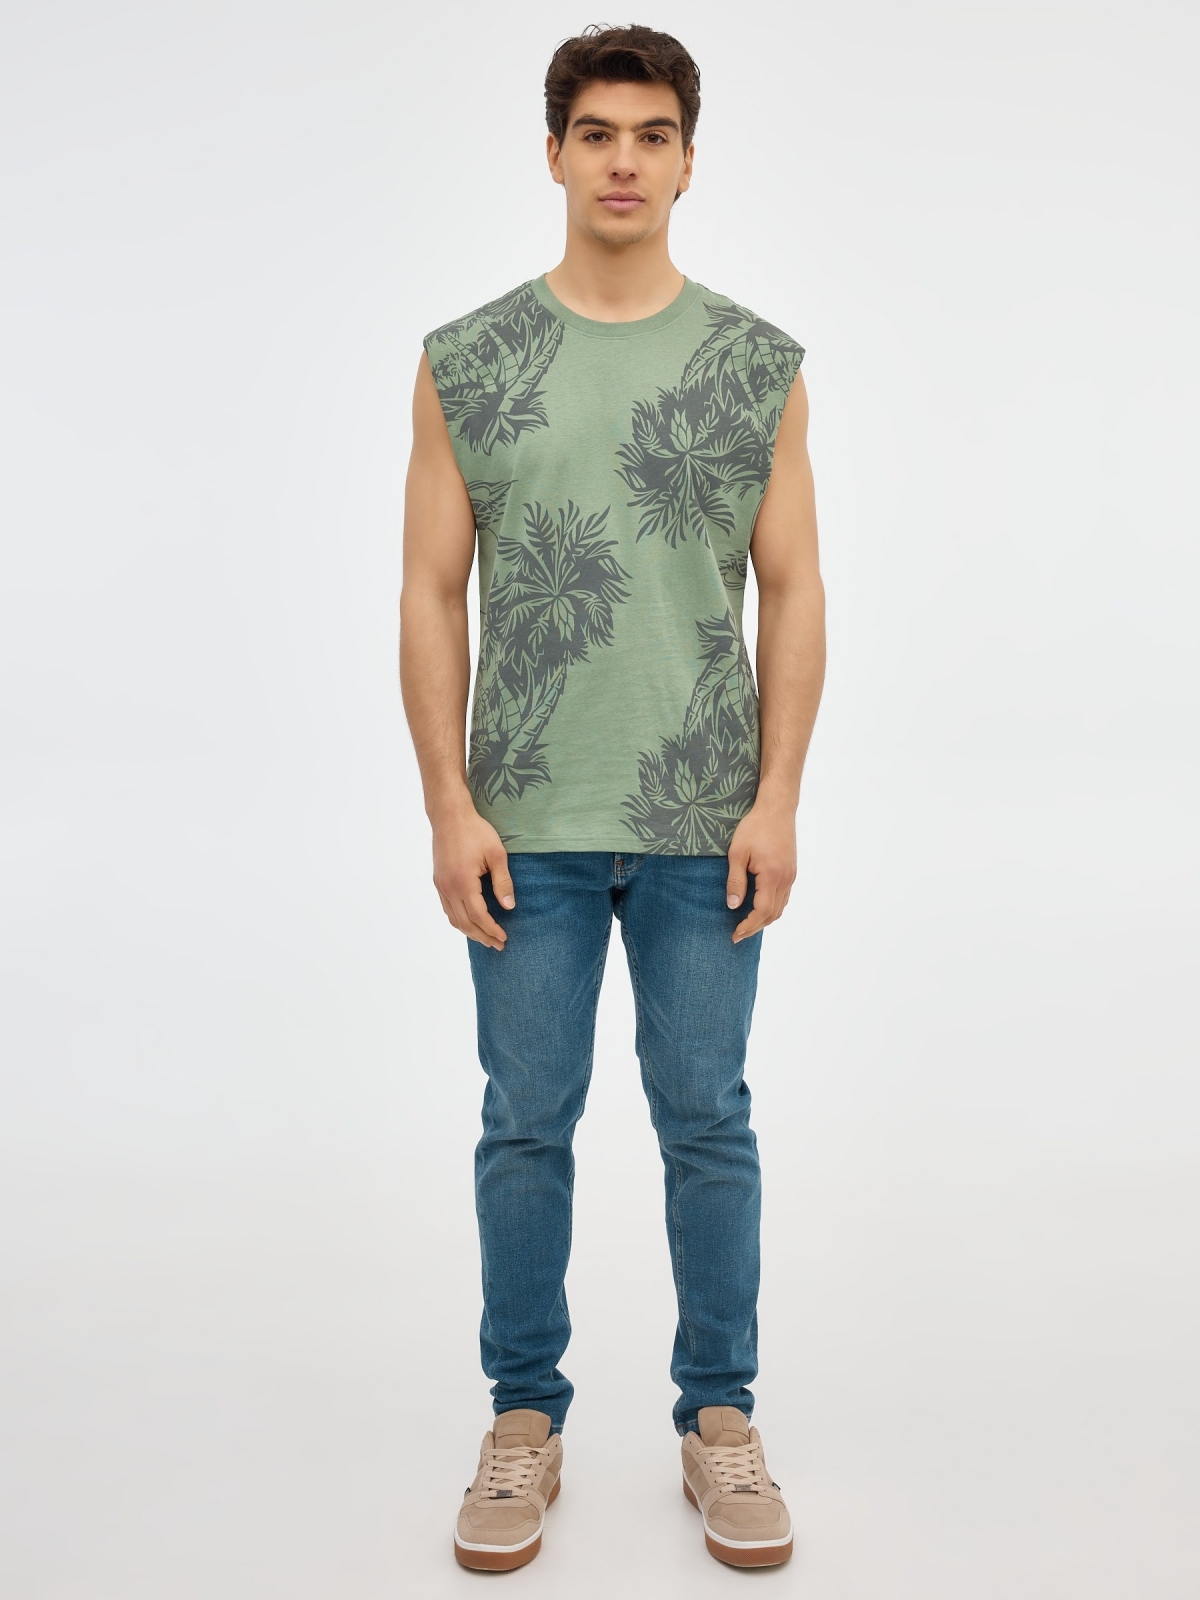 Sleeveless print t-shirt olive green front view